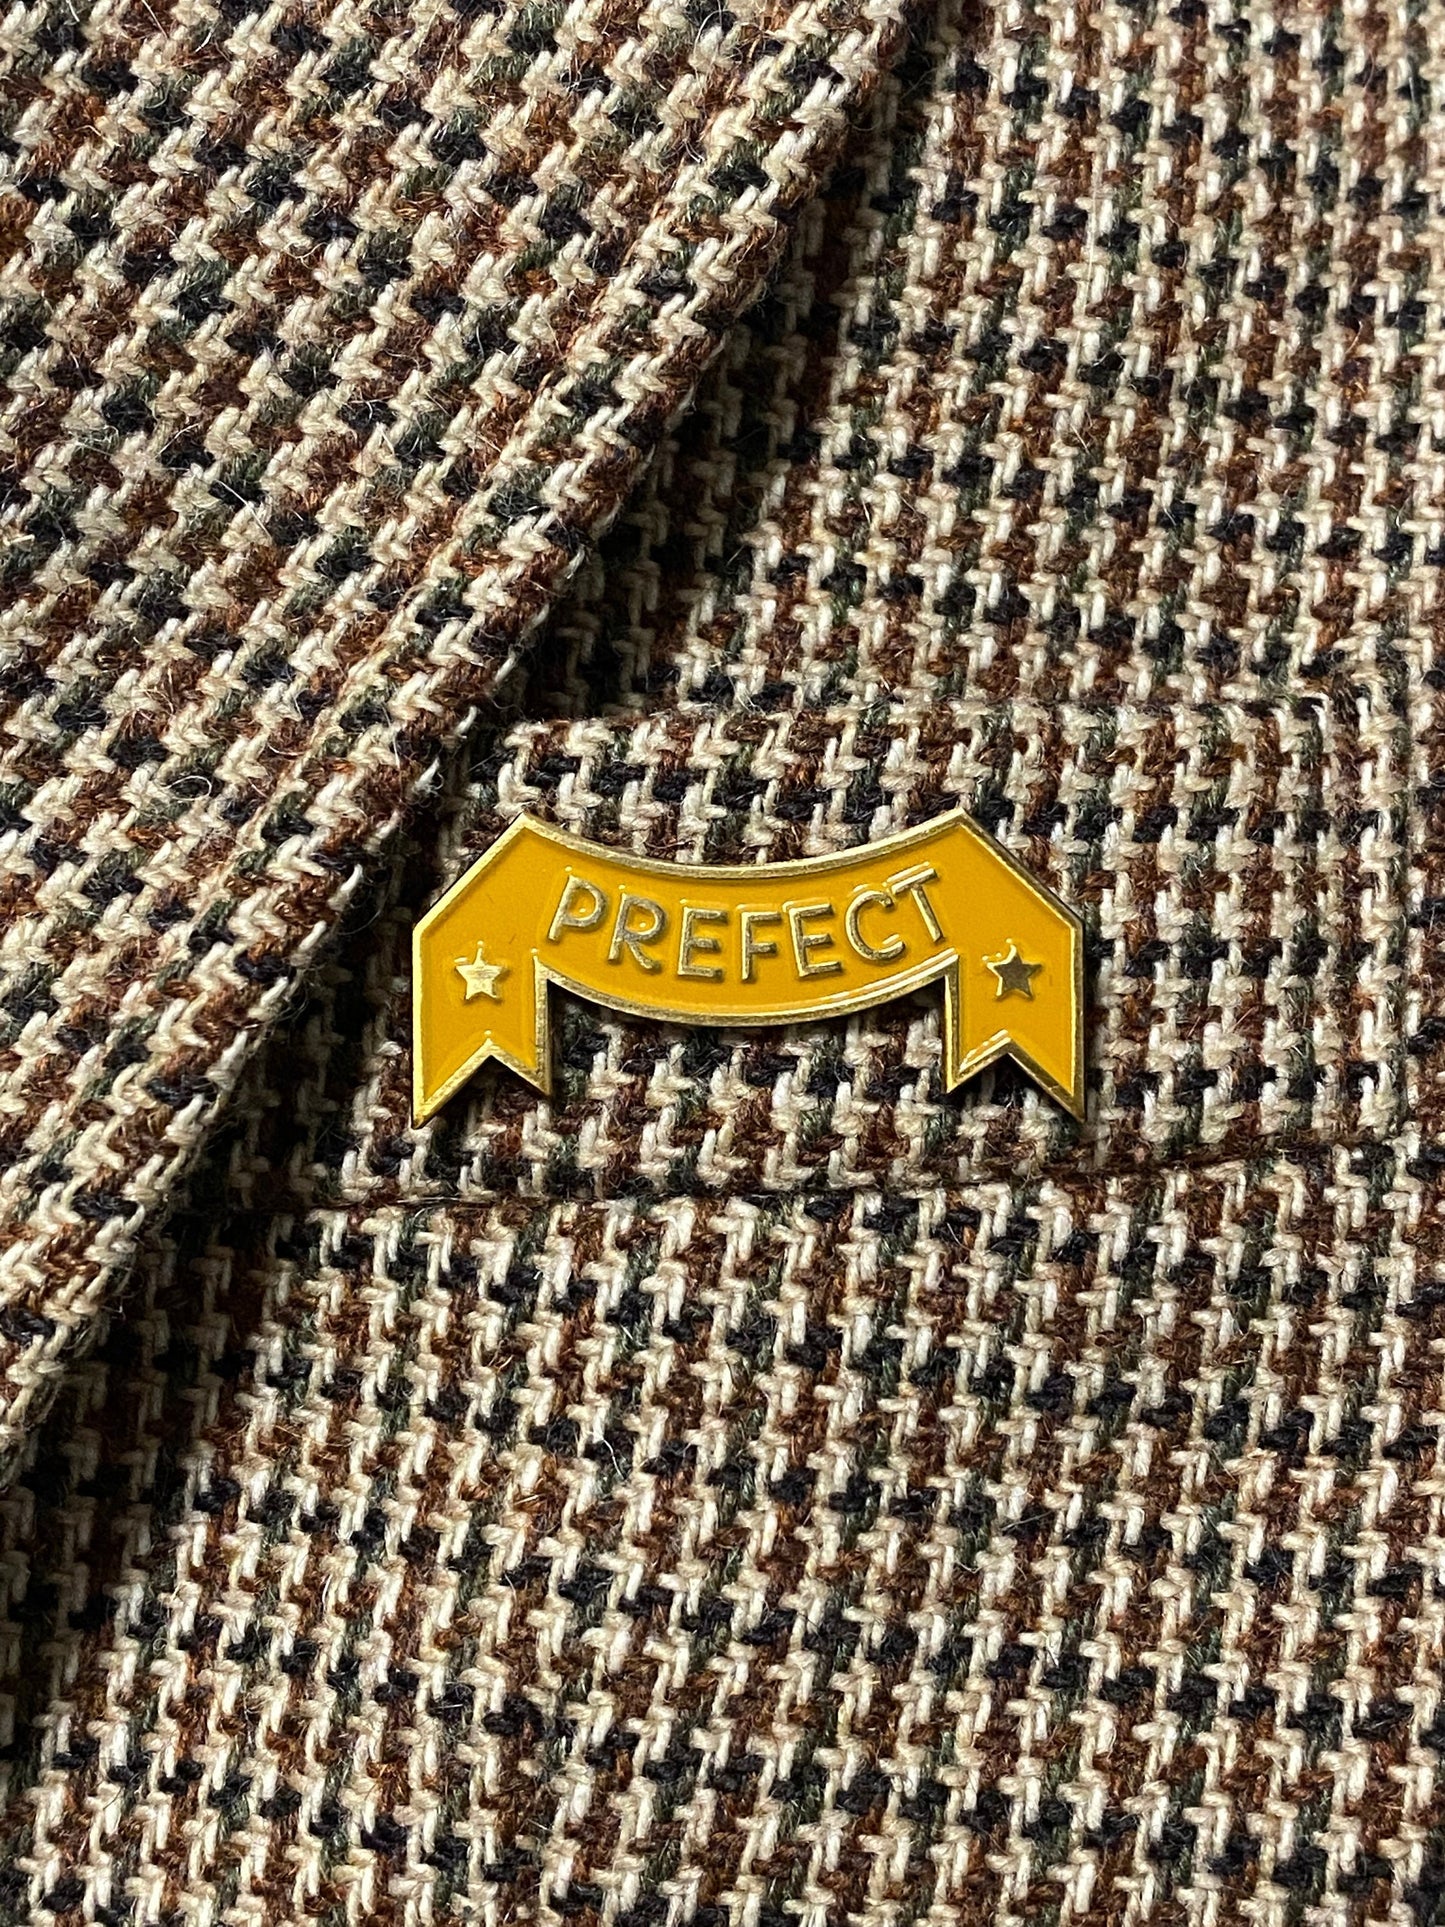 Prefect vintage enamel pin yellow and gold wizarding world